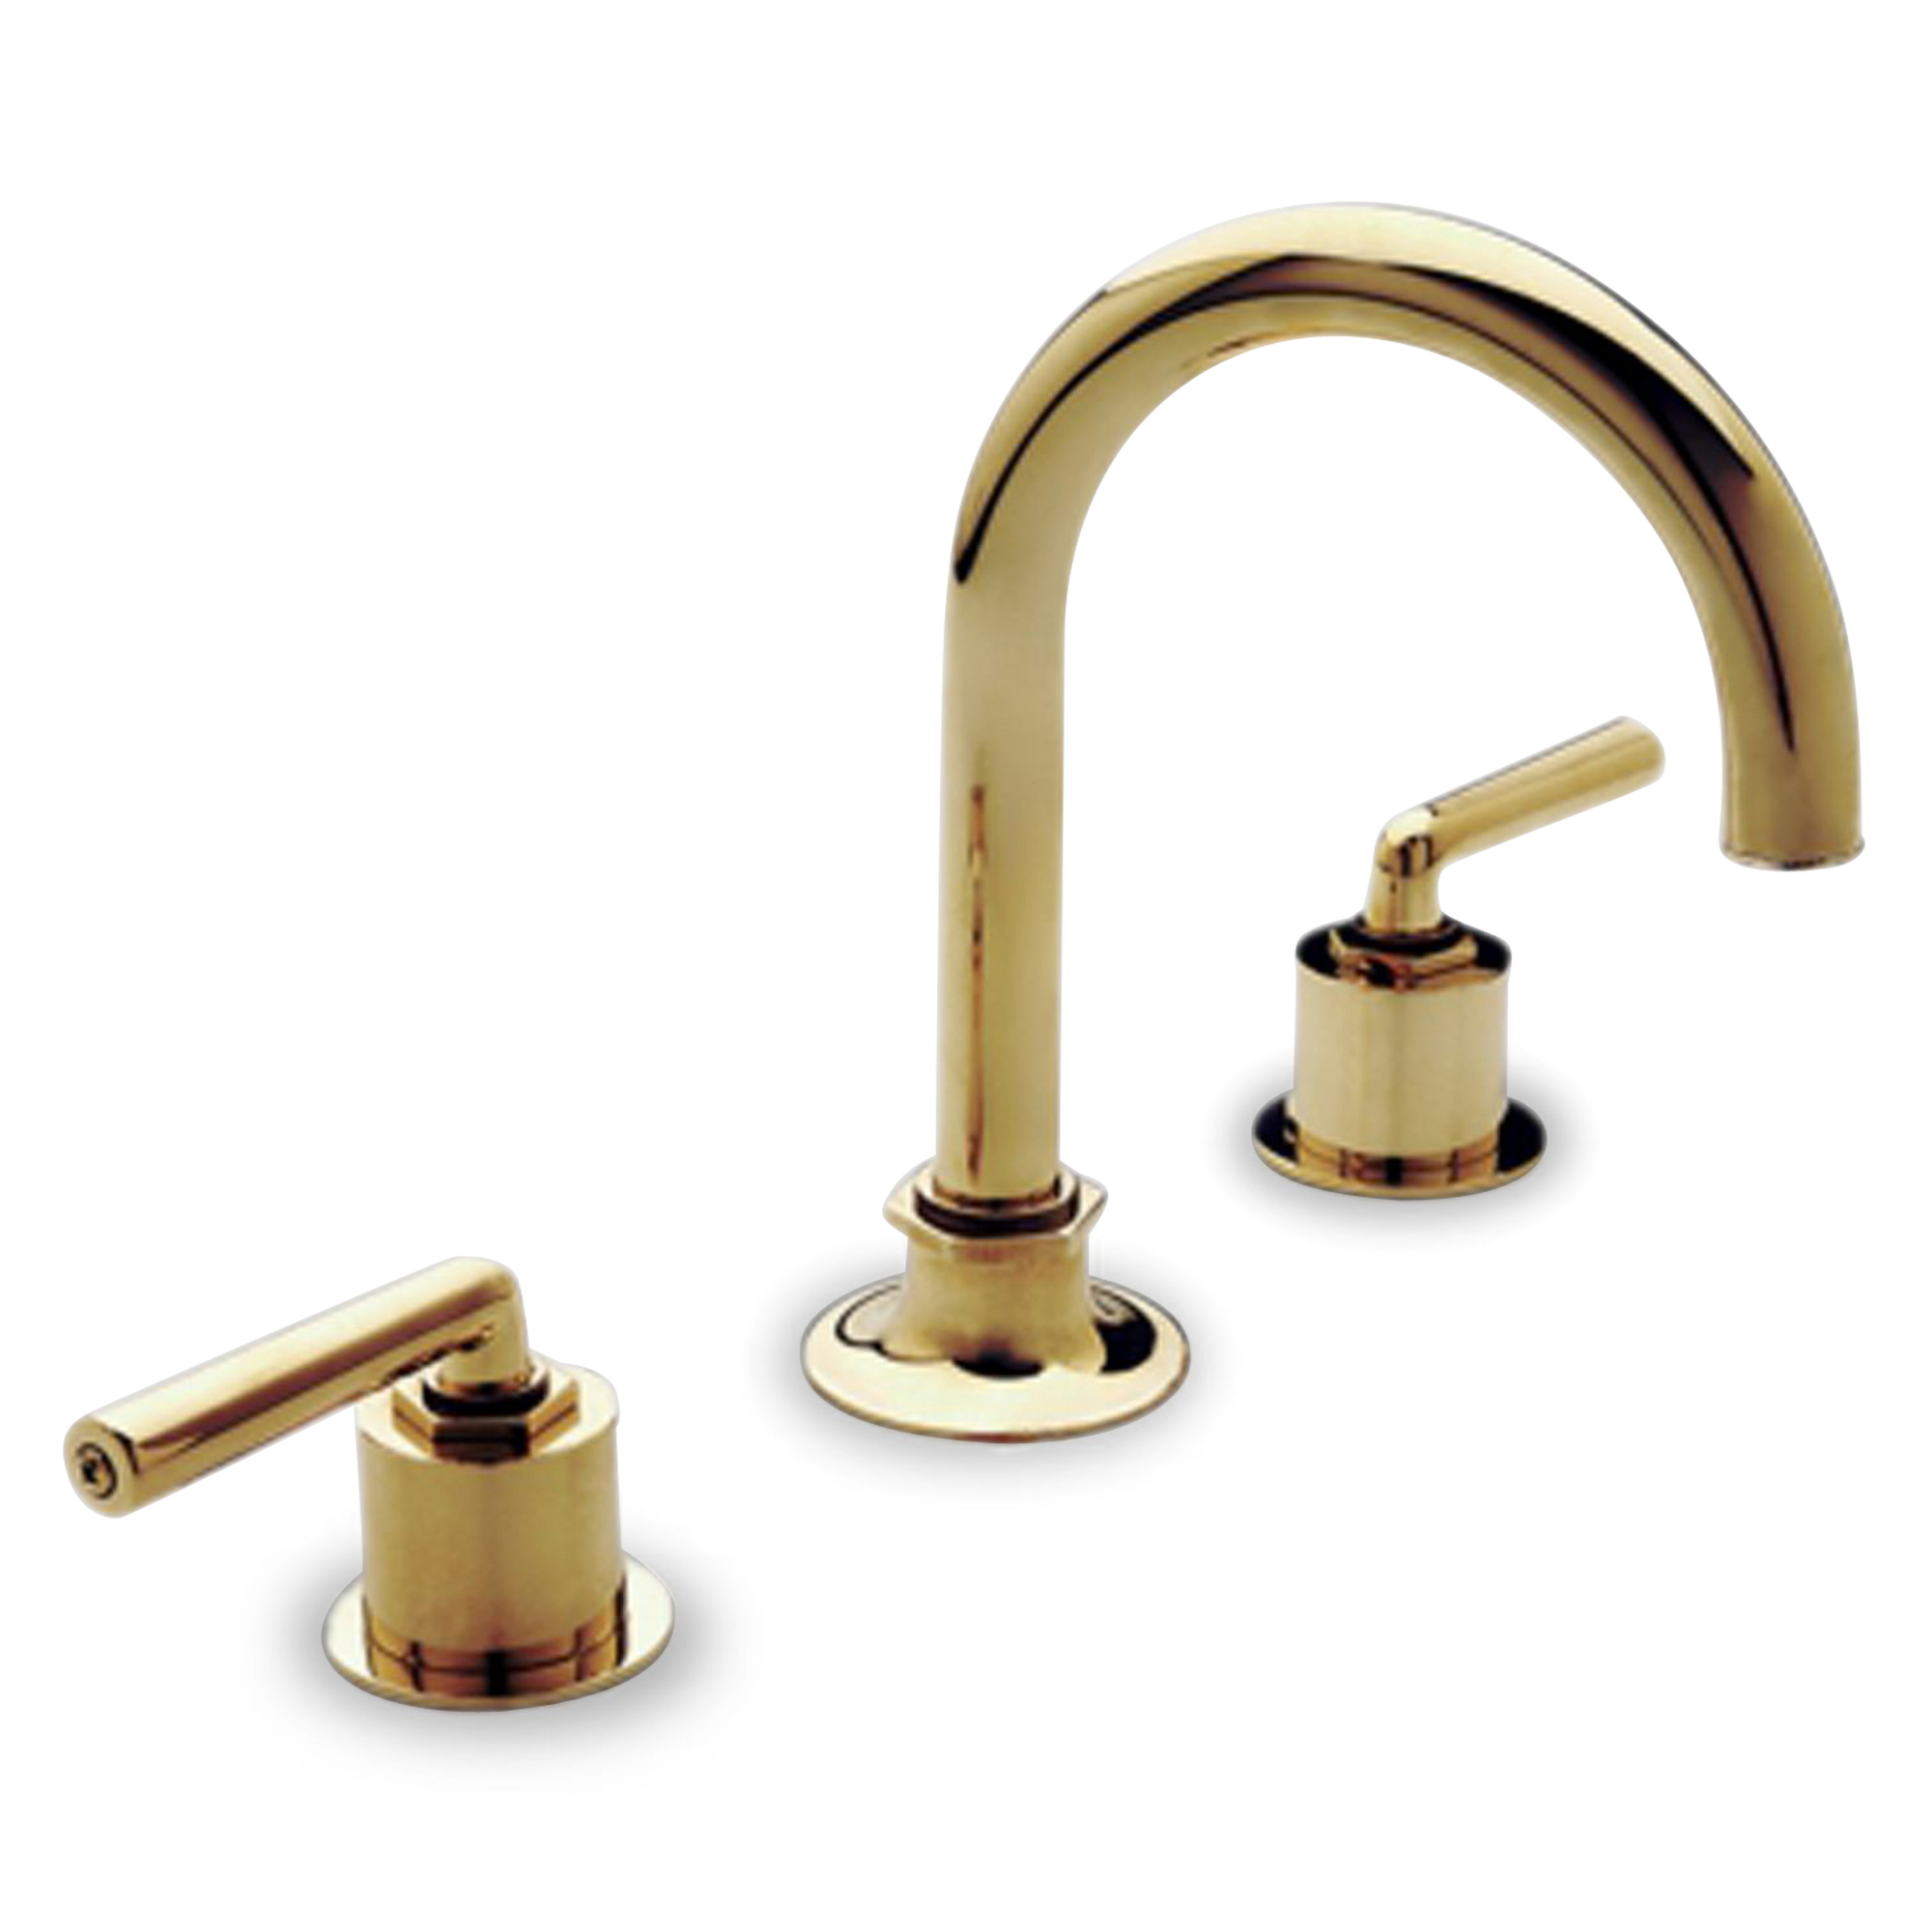 A transitional faucet with lever handles and gooseneck spout.